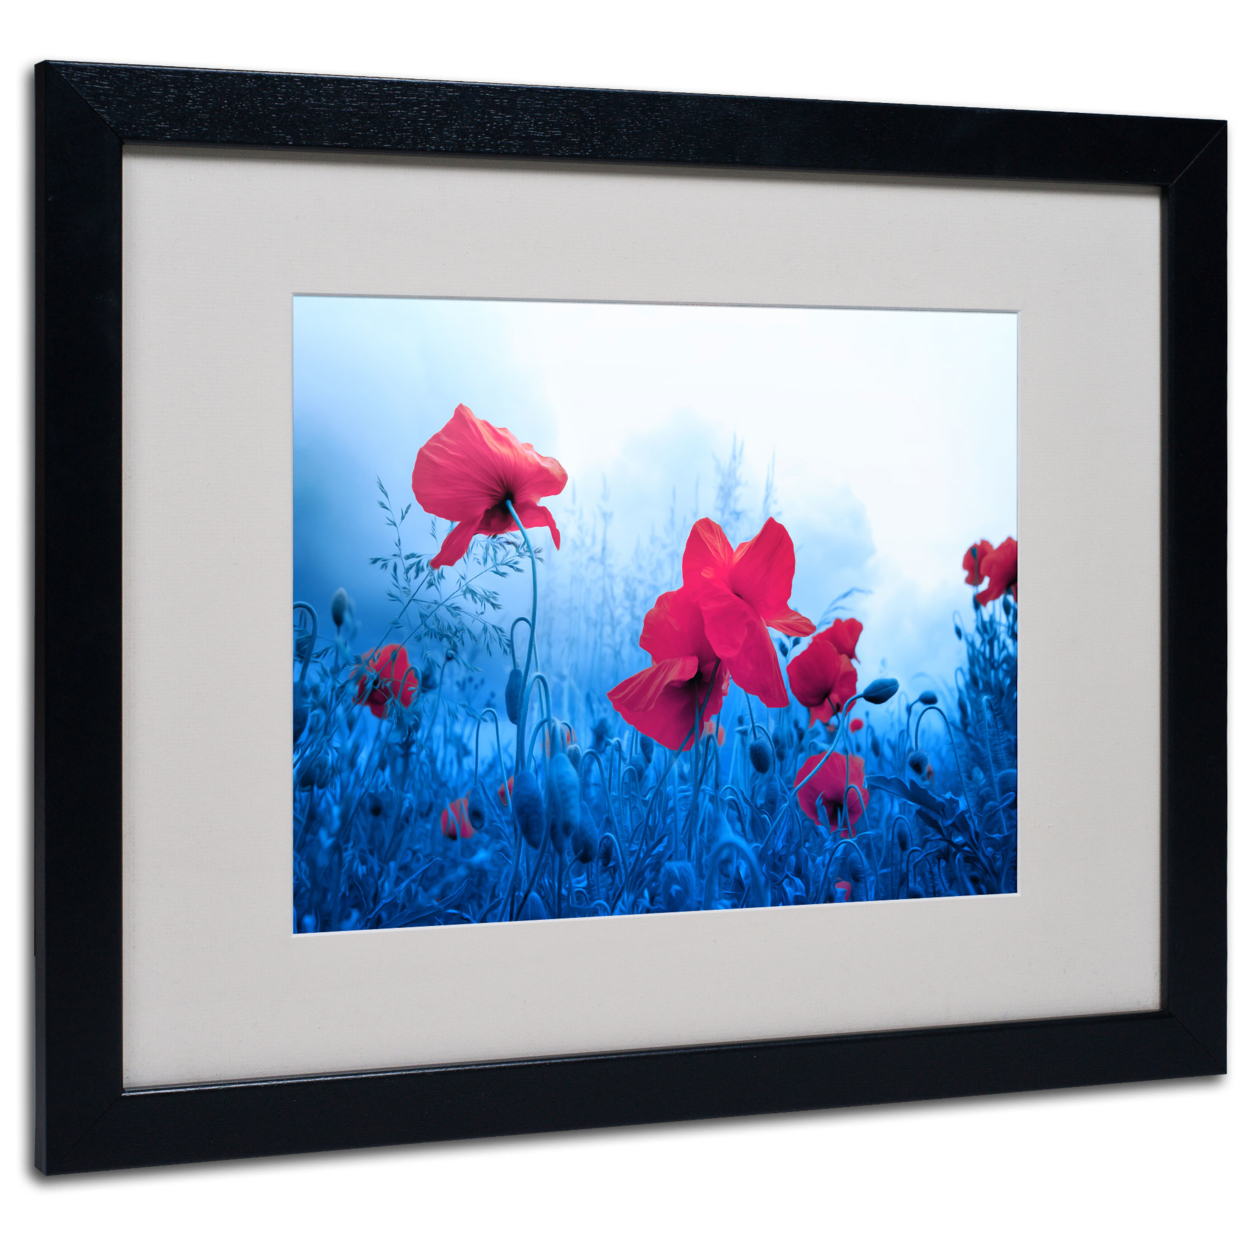 Philippe Sainte-Laudy 'Jam For Poppies' Black Wooden Framed Art 18 X 22 Inches